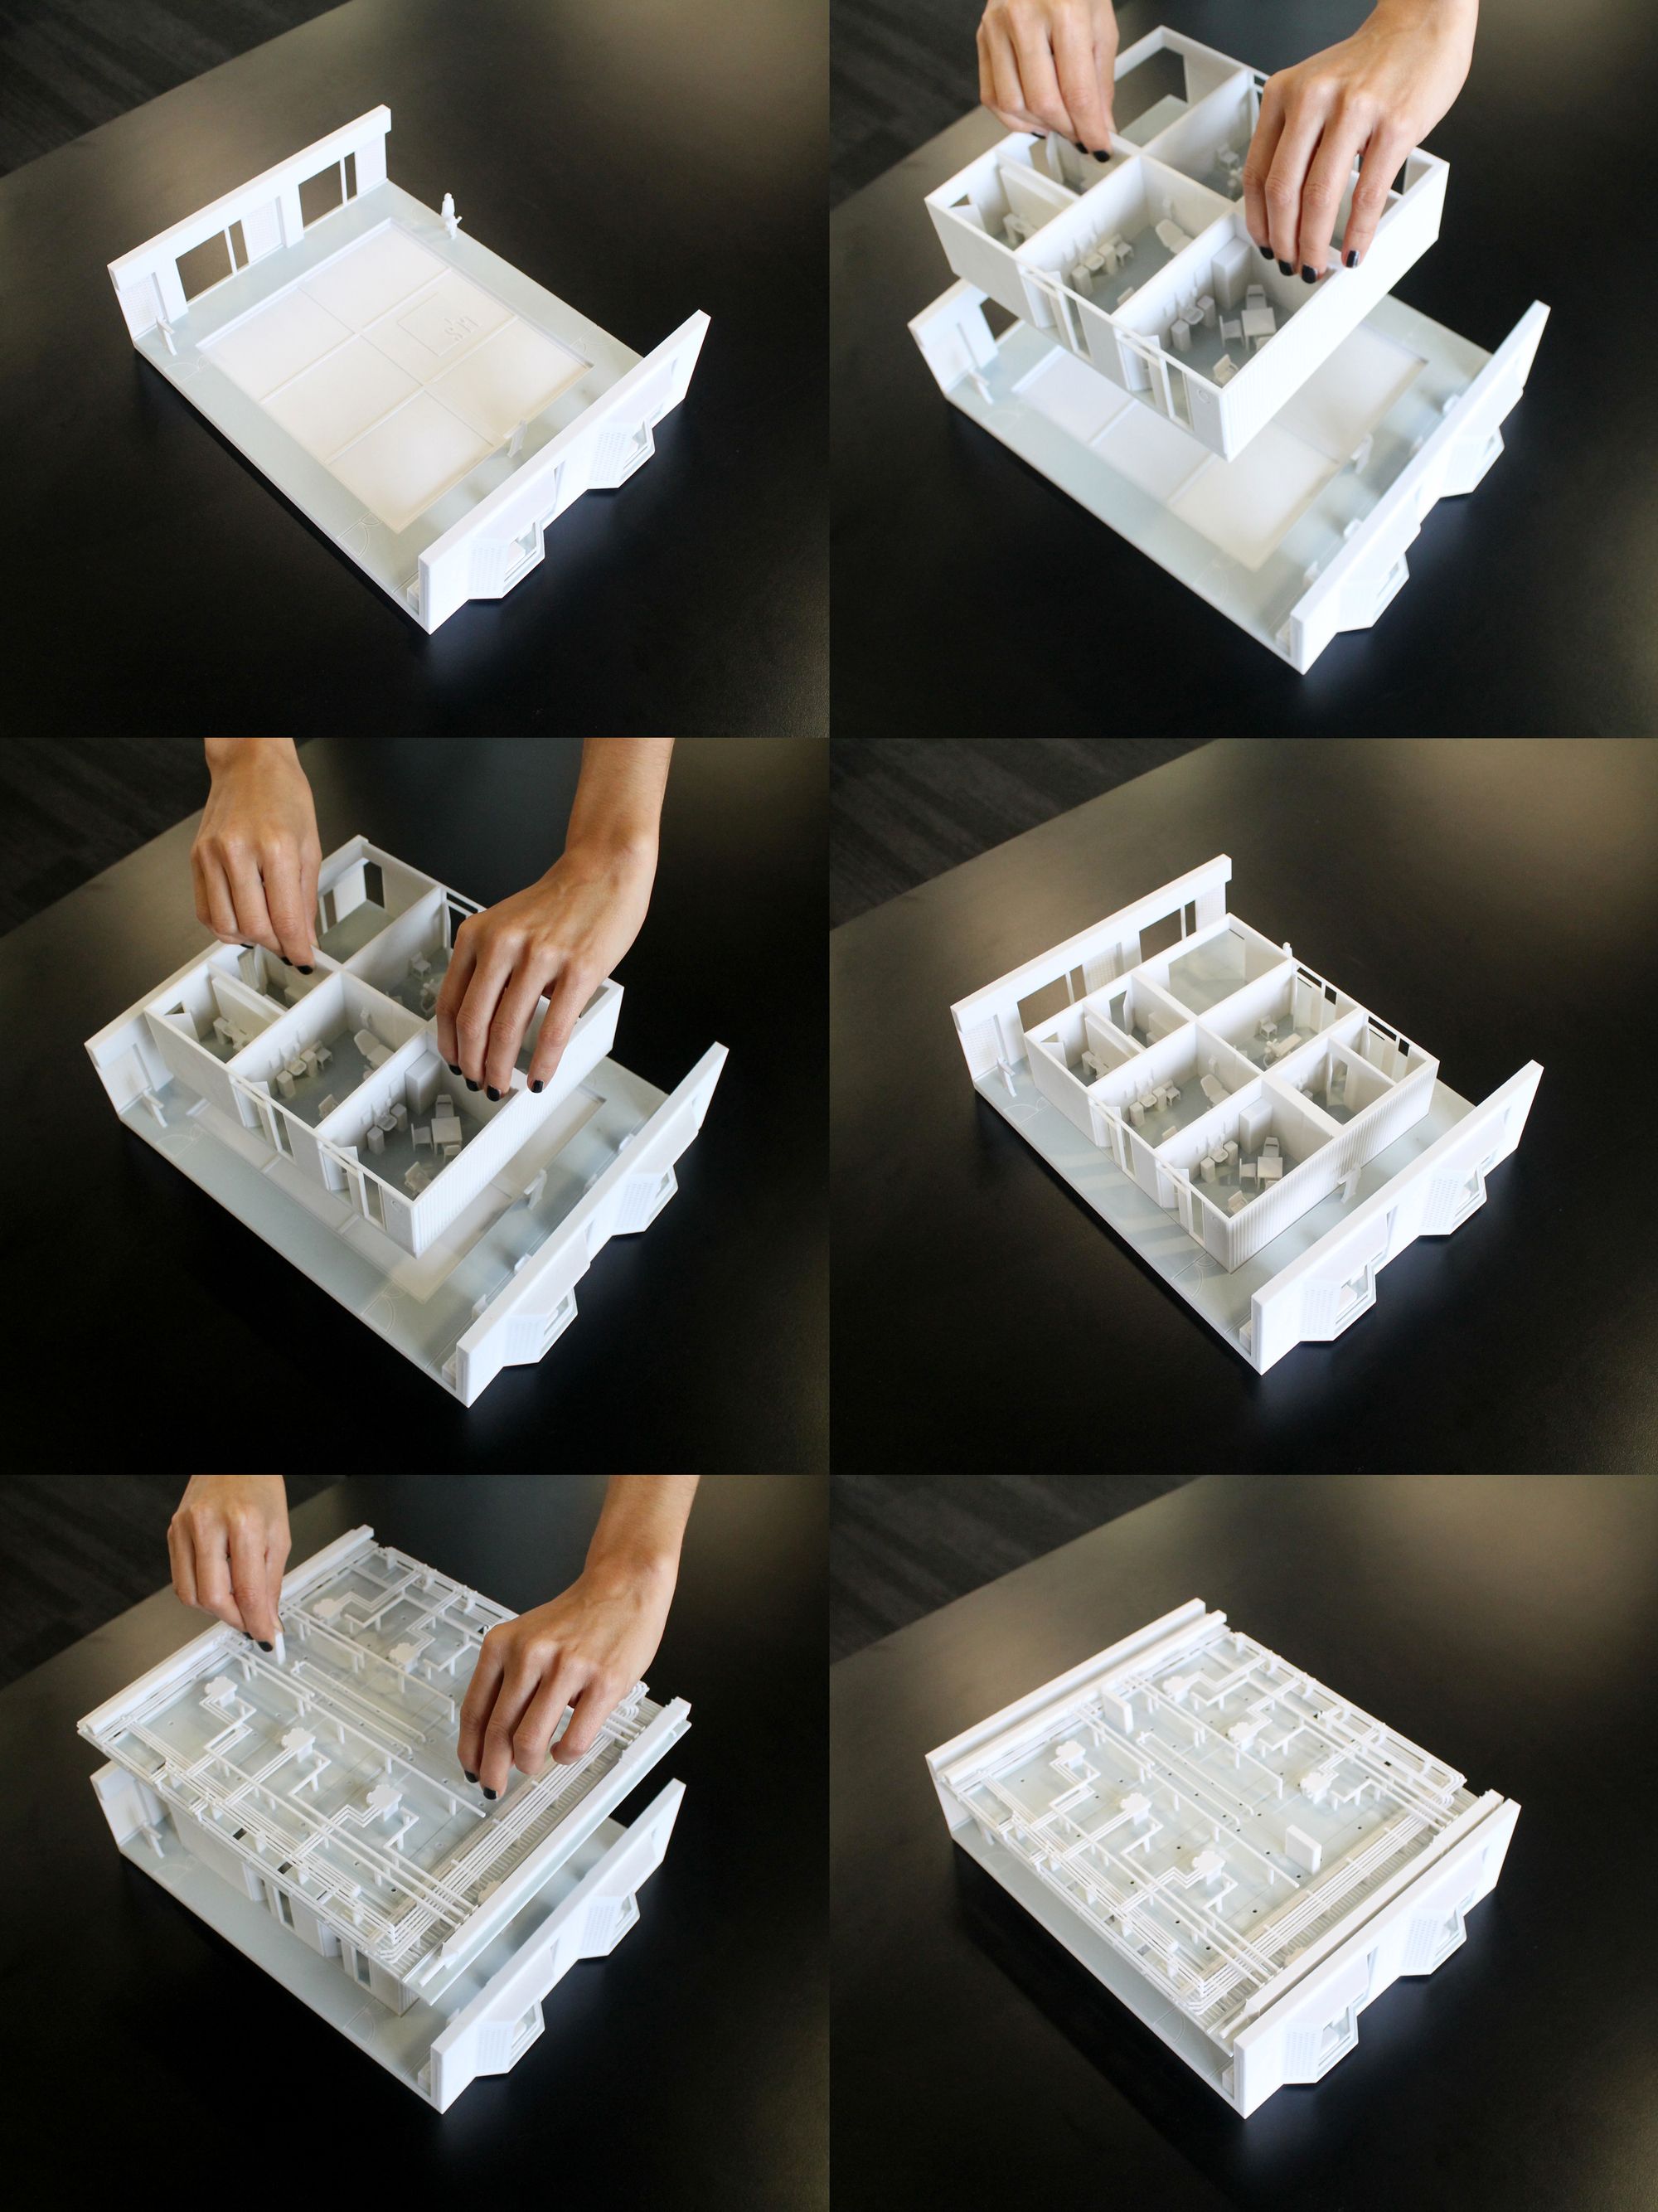 3d printing in architecture research paper